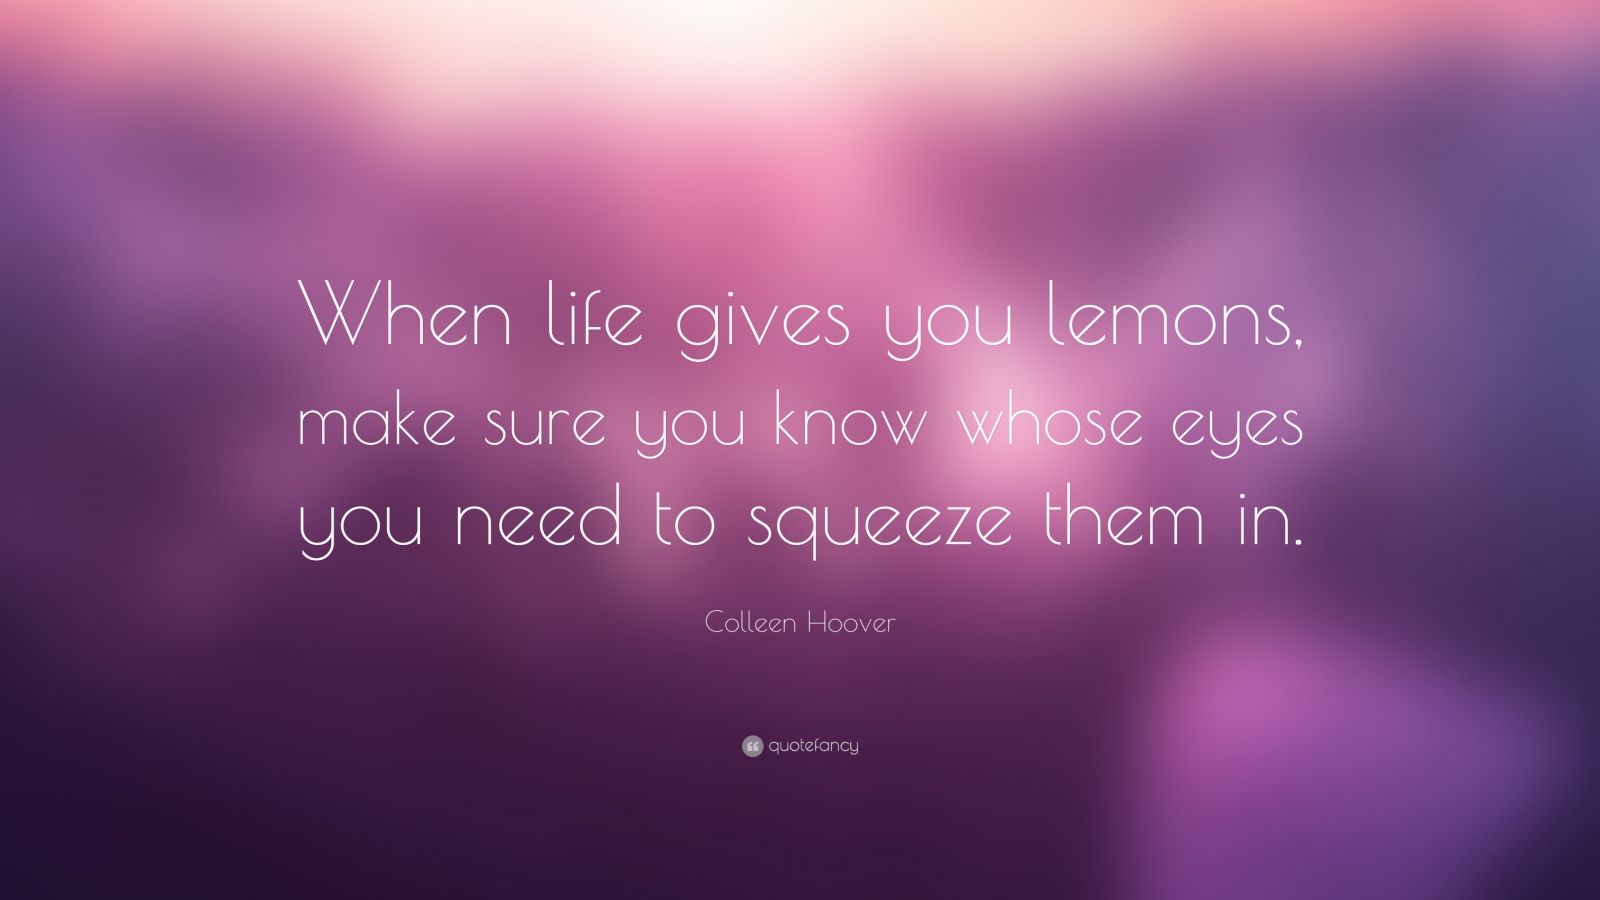 Colleen Hoover Quote “When life gives you lemons make sure you know whose